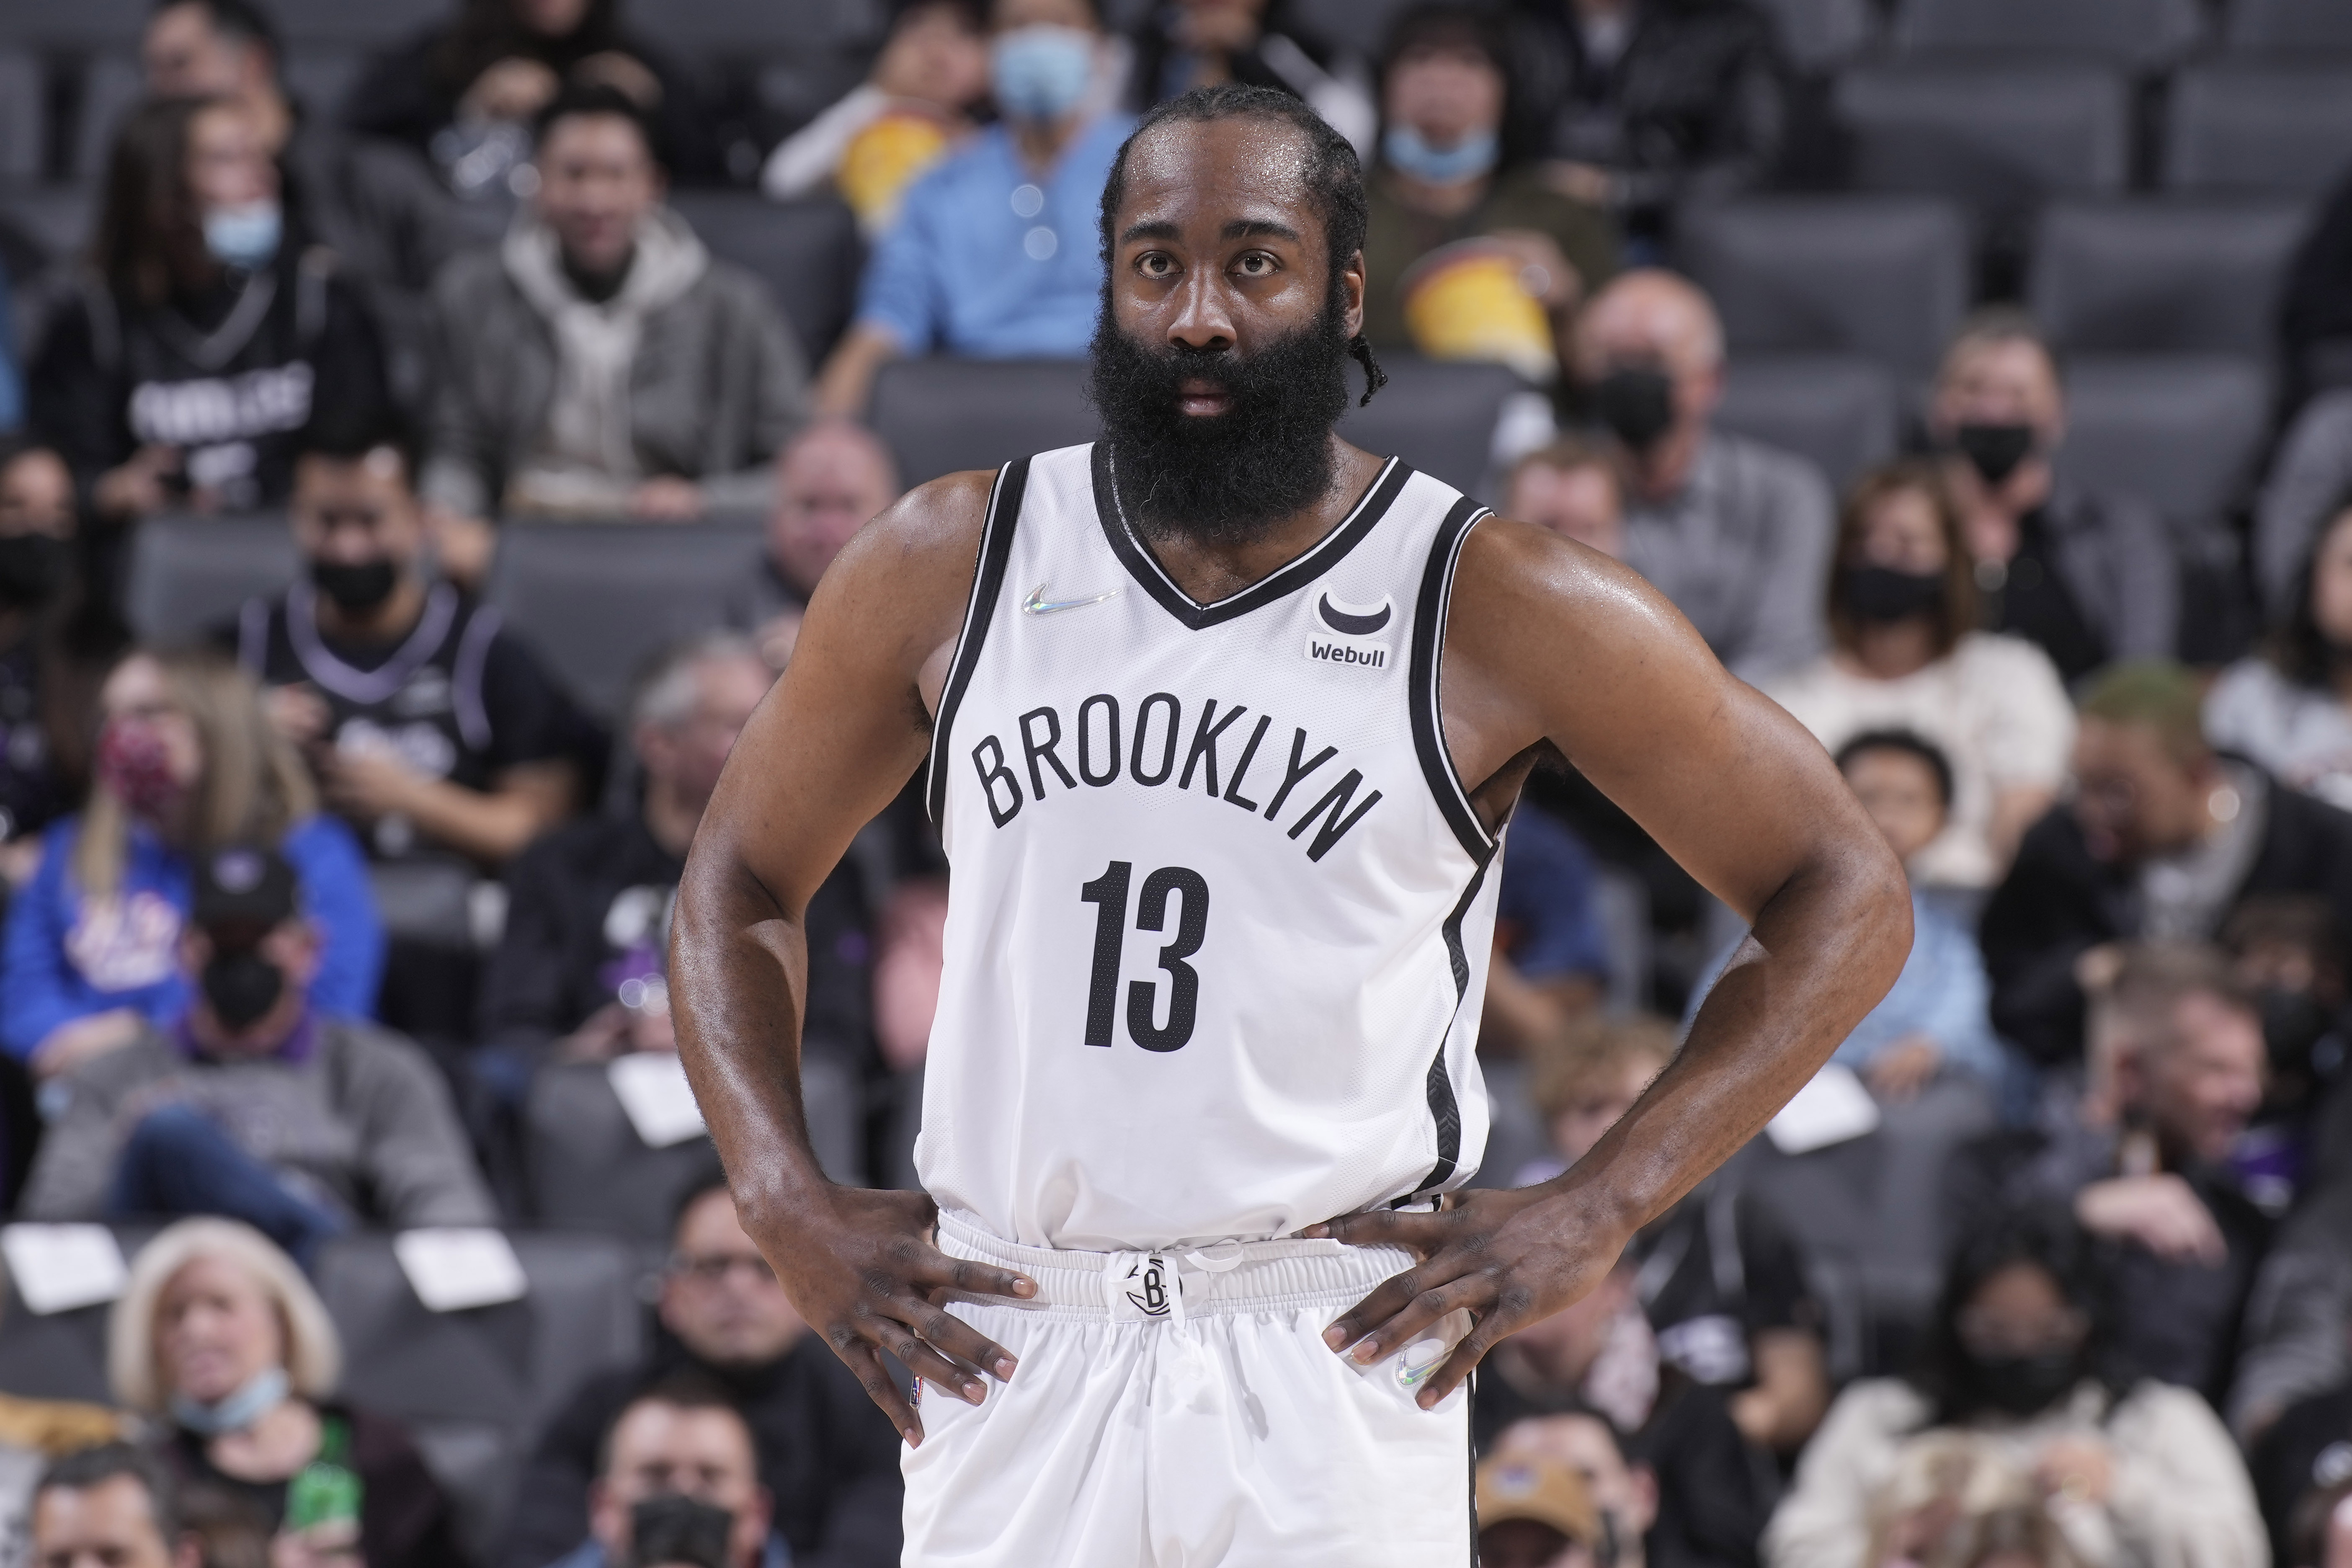 NBA Rumors: Harden Wants Trade To Sixers; Fears Backlash Of Request